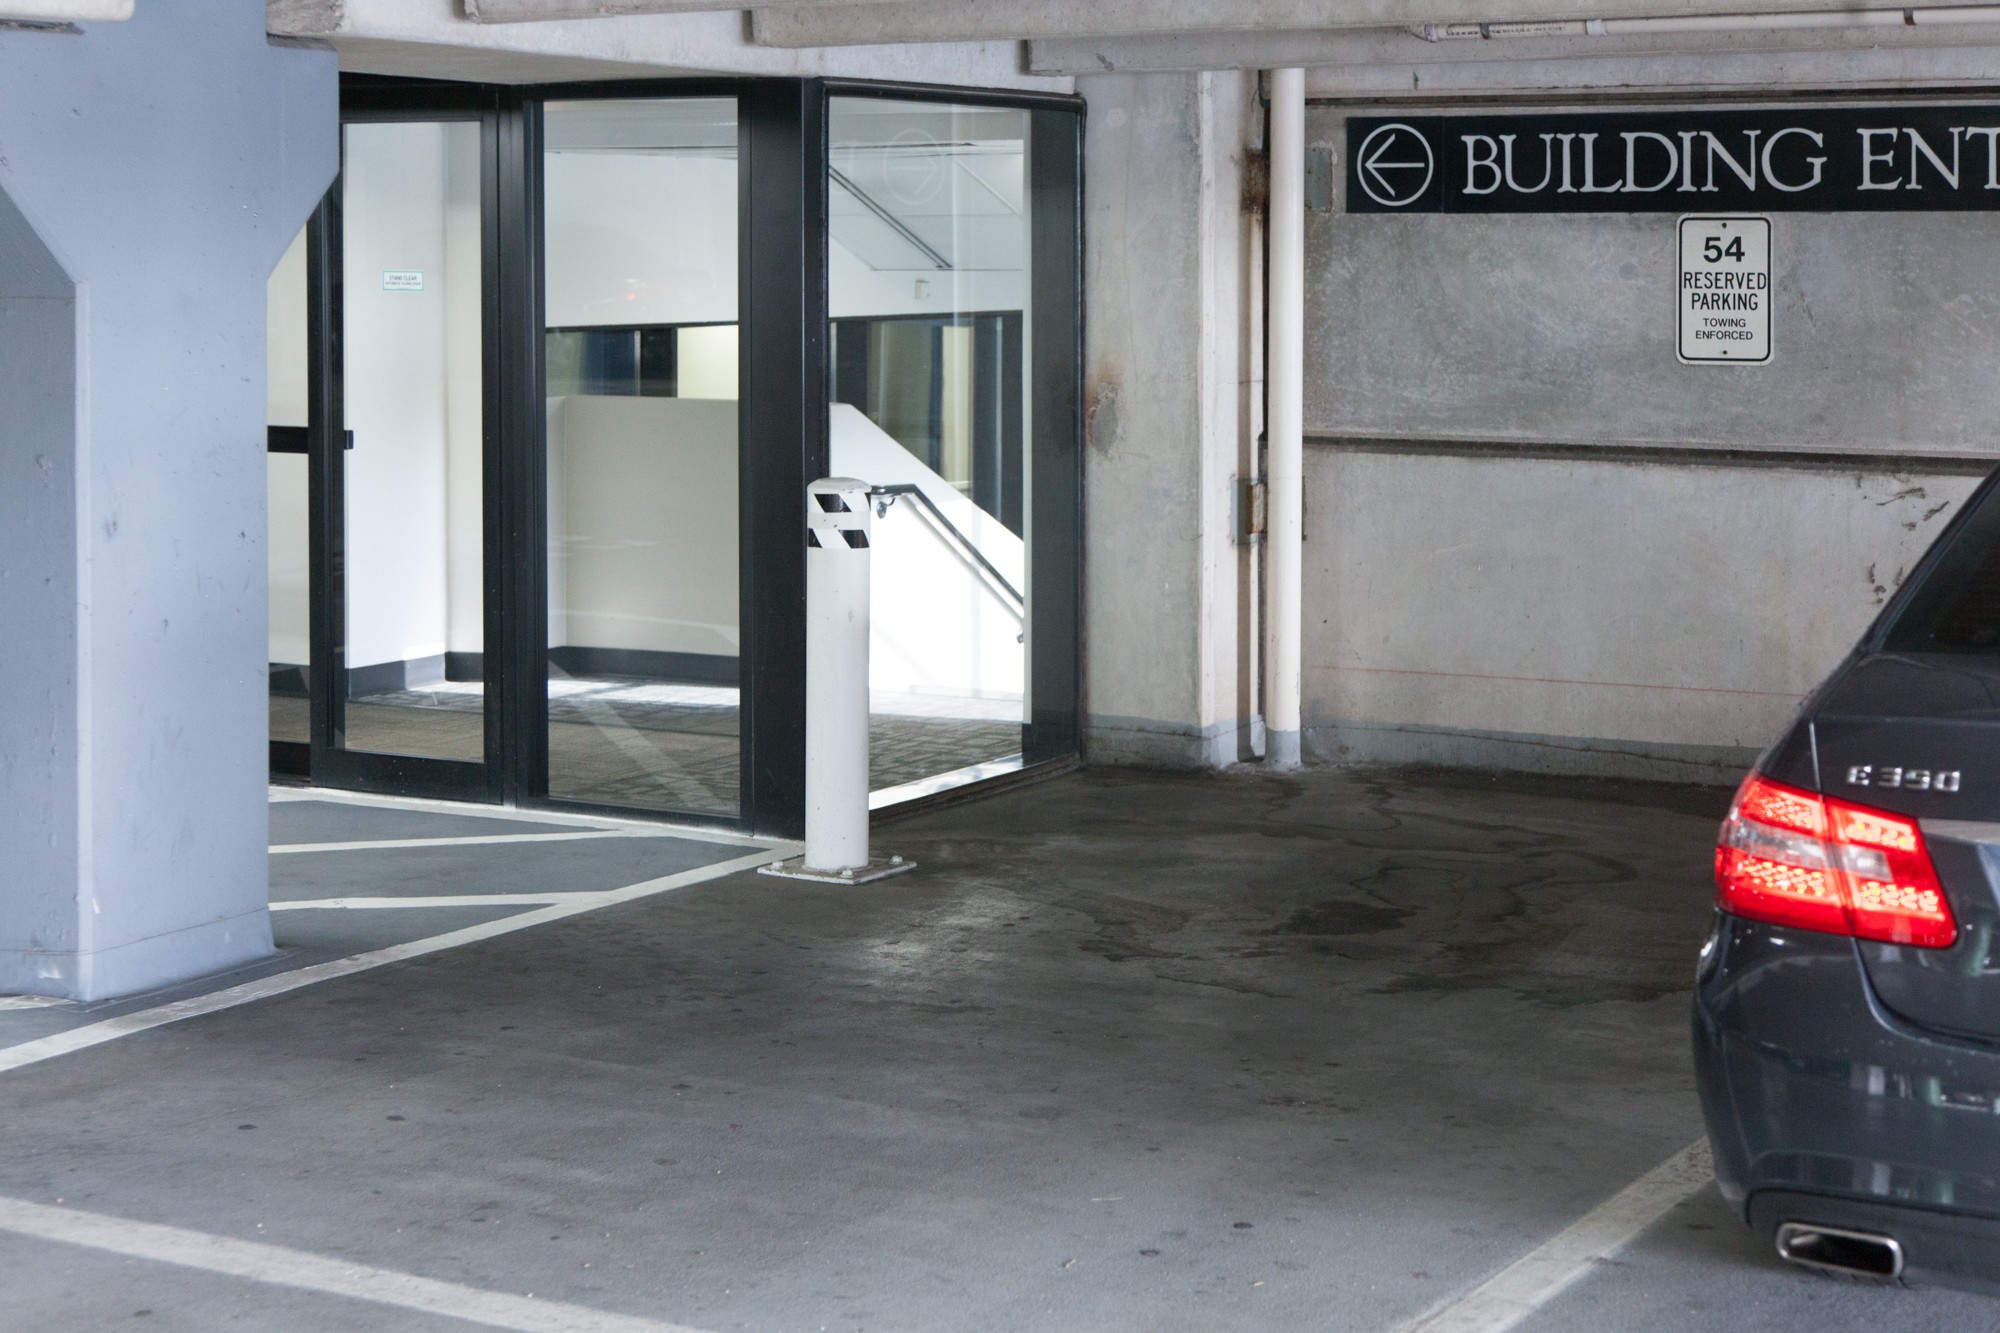 Premium Reserved Parking - LEFT=Door | Right = Your CEOs Parking Space